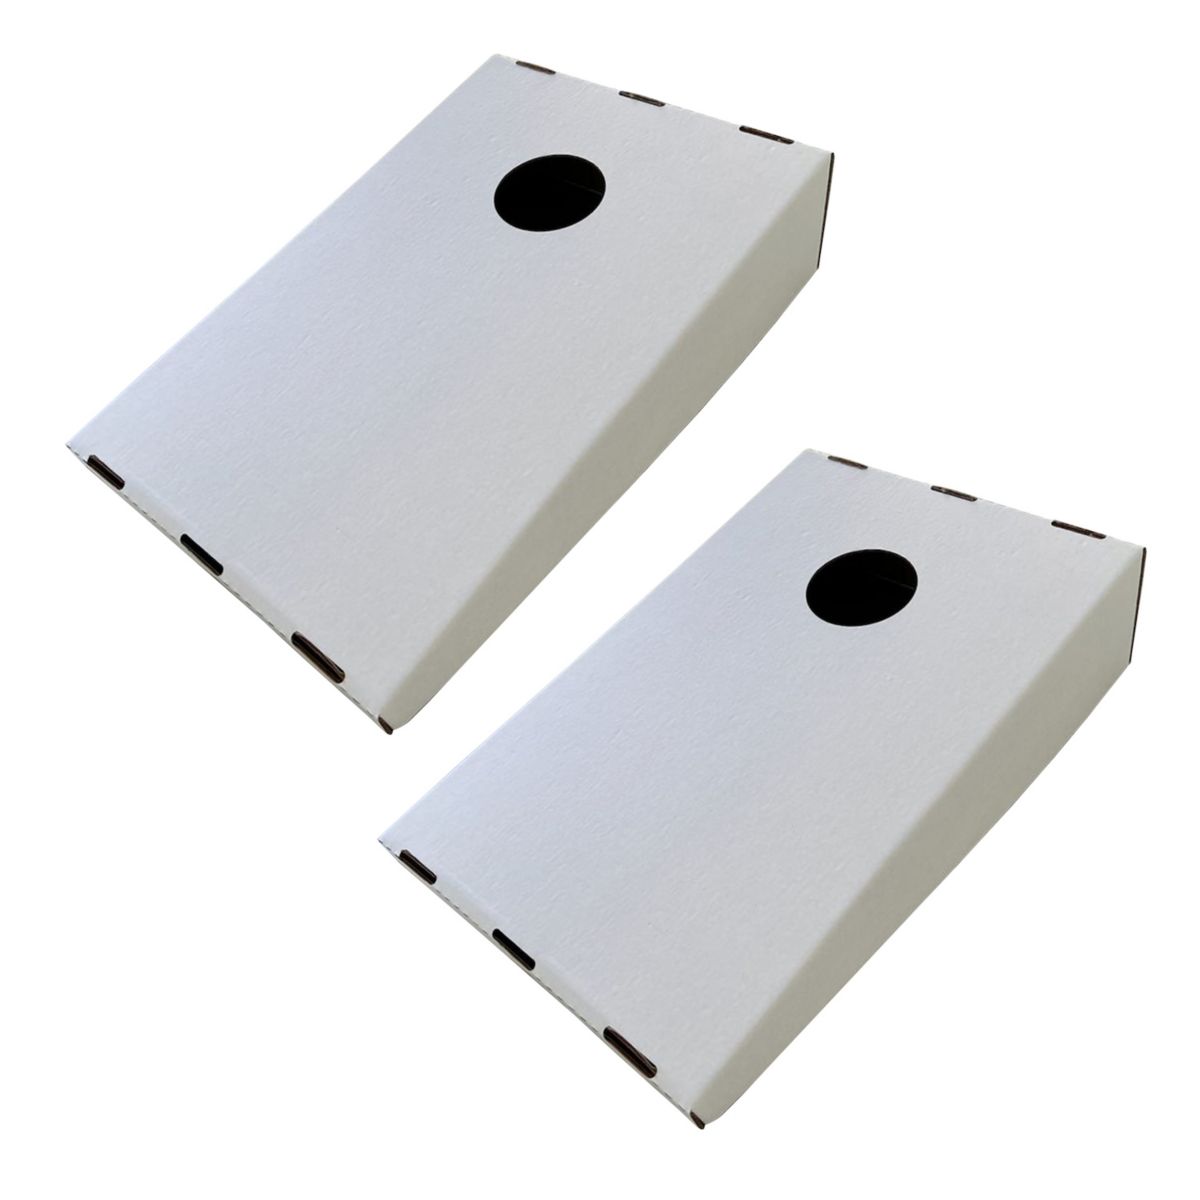 Paricon, LLC CCT-00178 Cardboard Outdoor Foldable Corn Hole Boards (2 Pack) Paricon